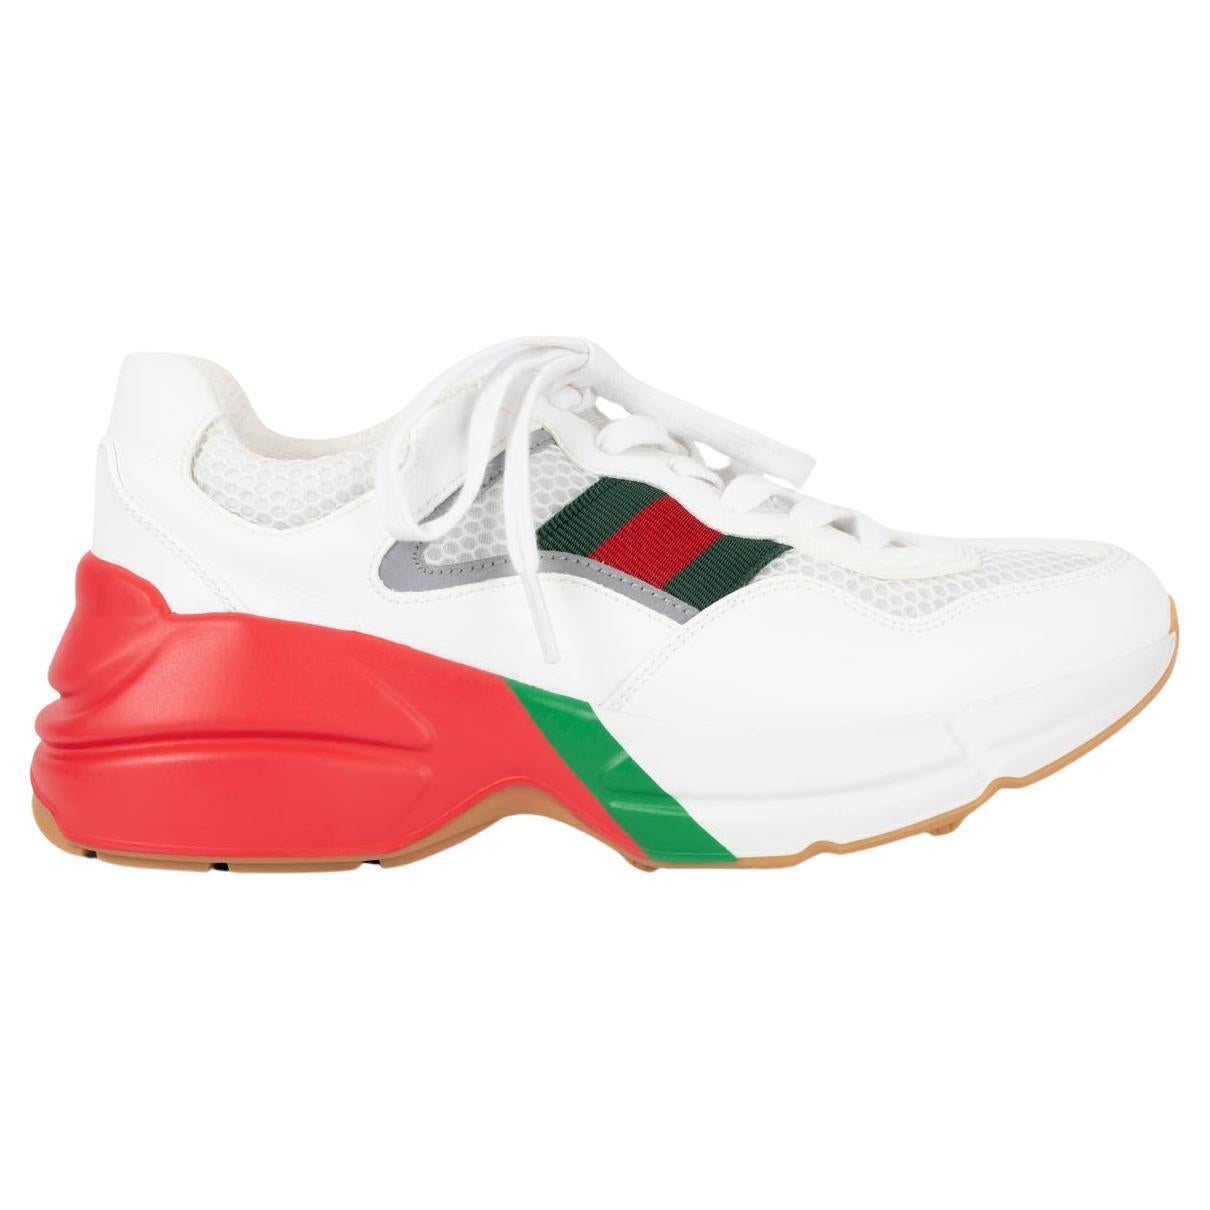 GUCCI white green red leather RYTHON Sneakers Shoes 36.5